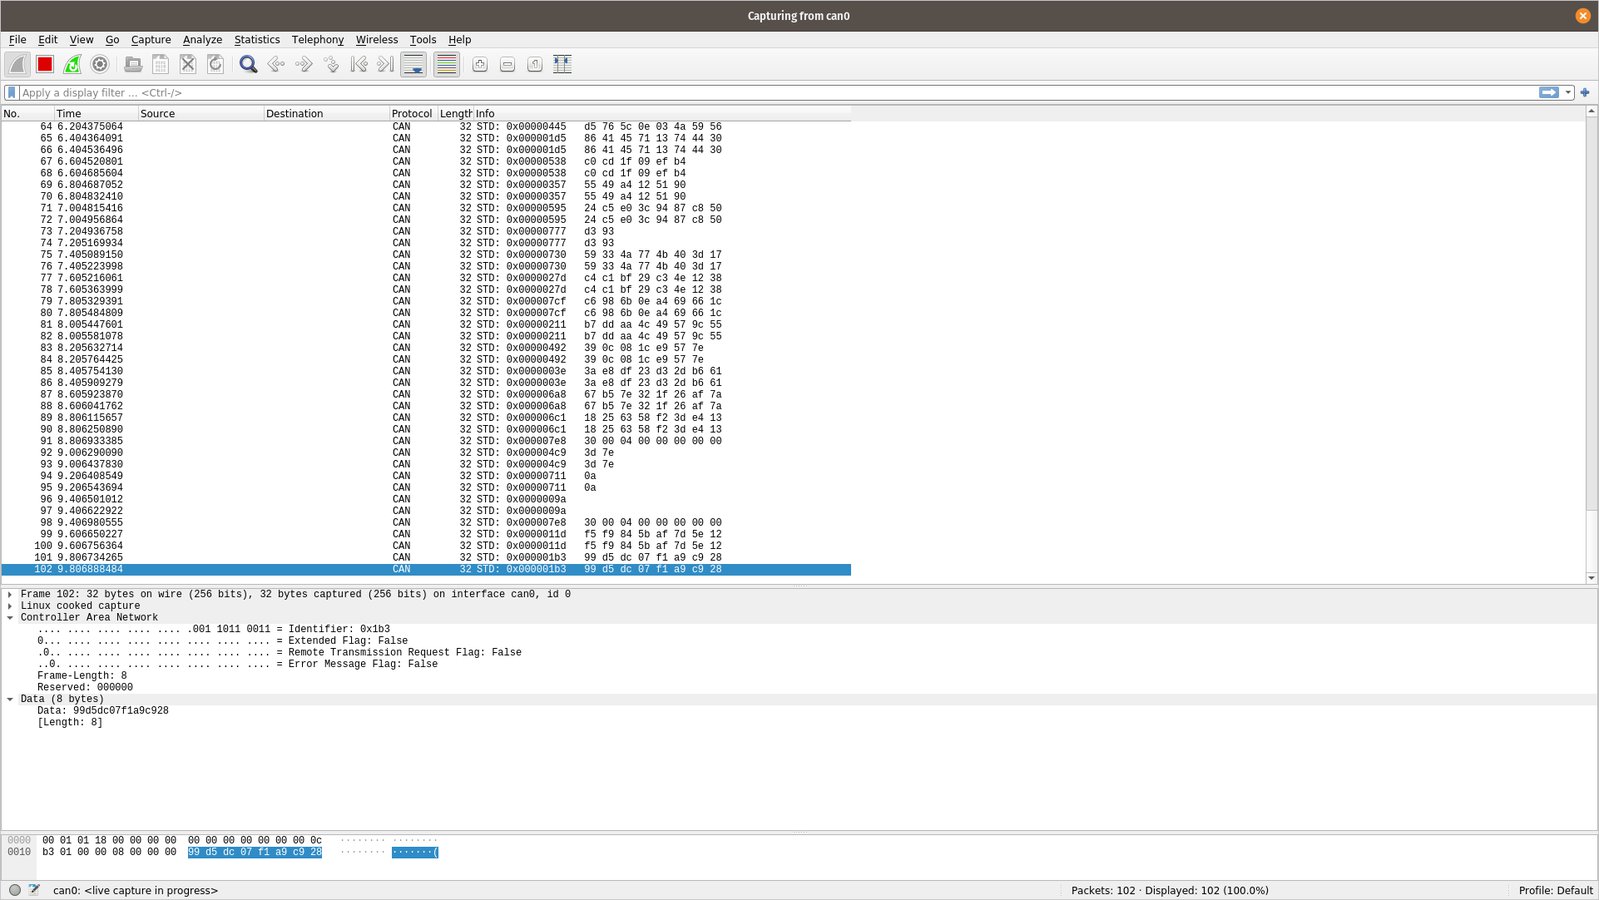 Capturing CAN frames in Wireshark